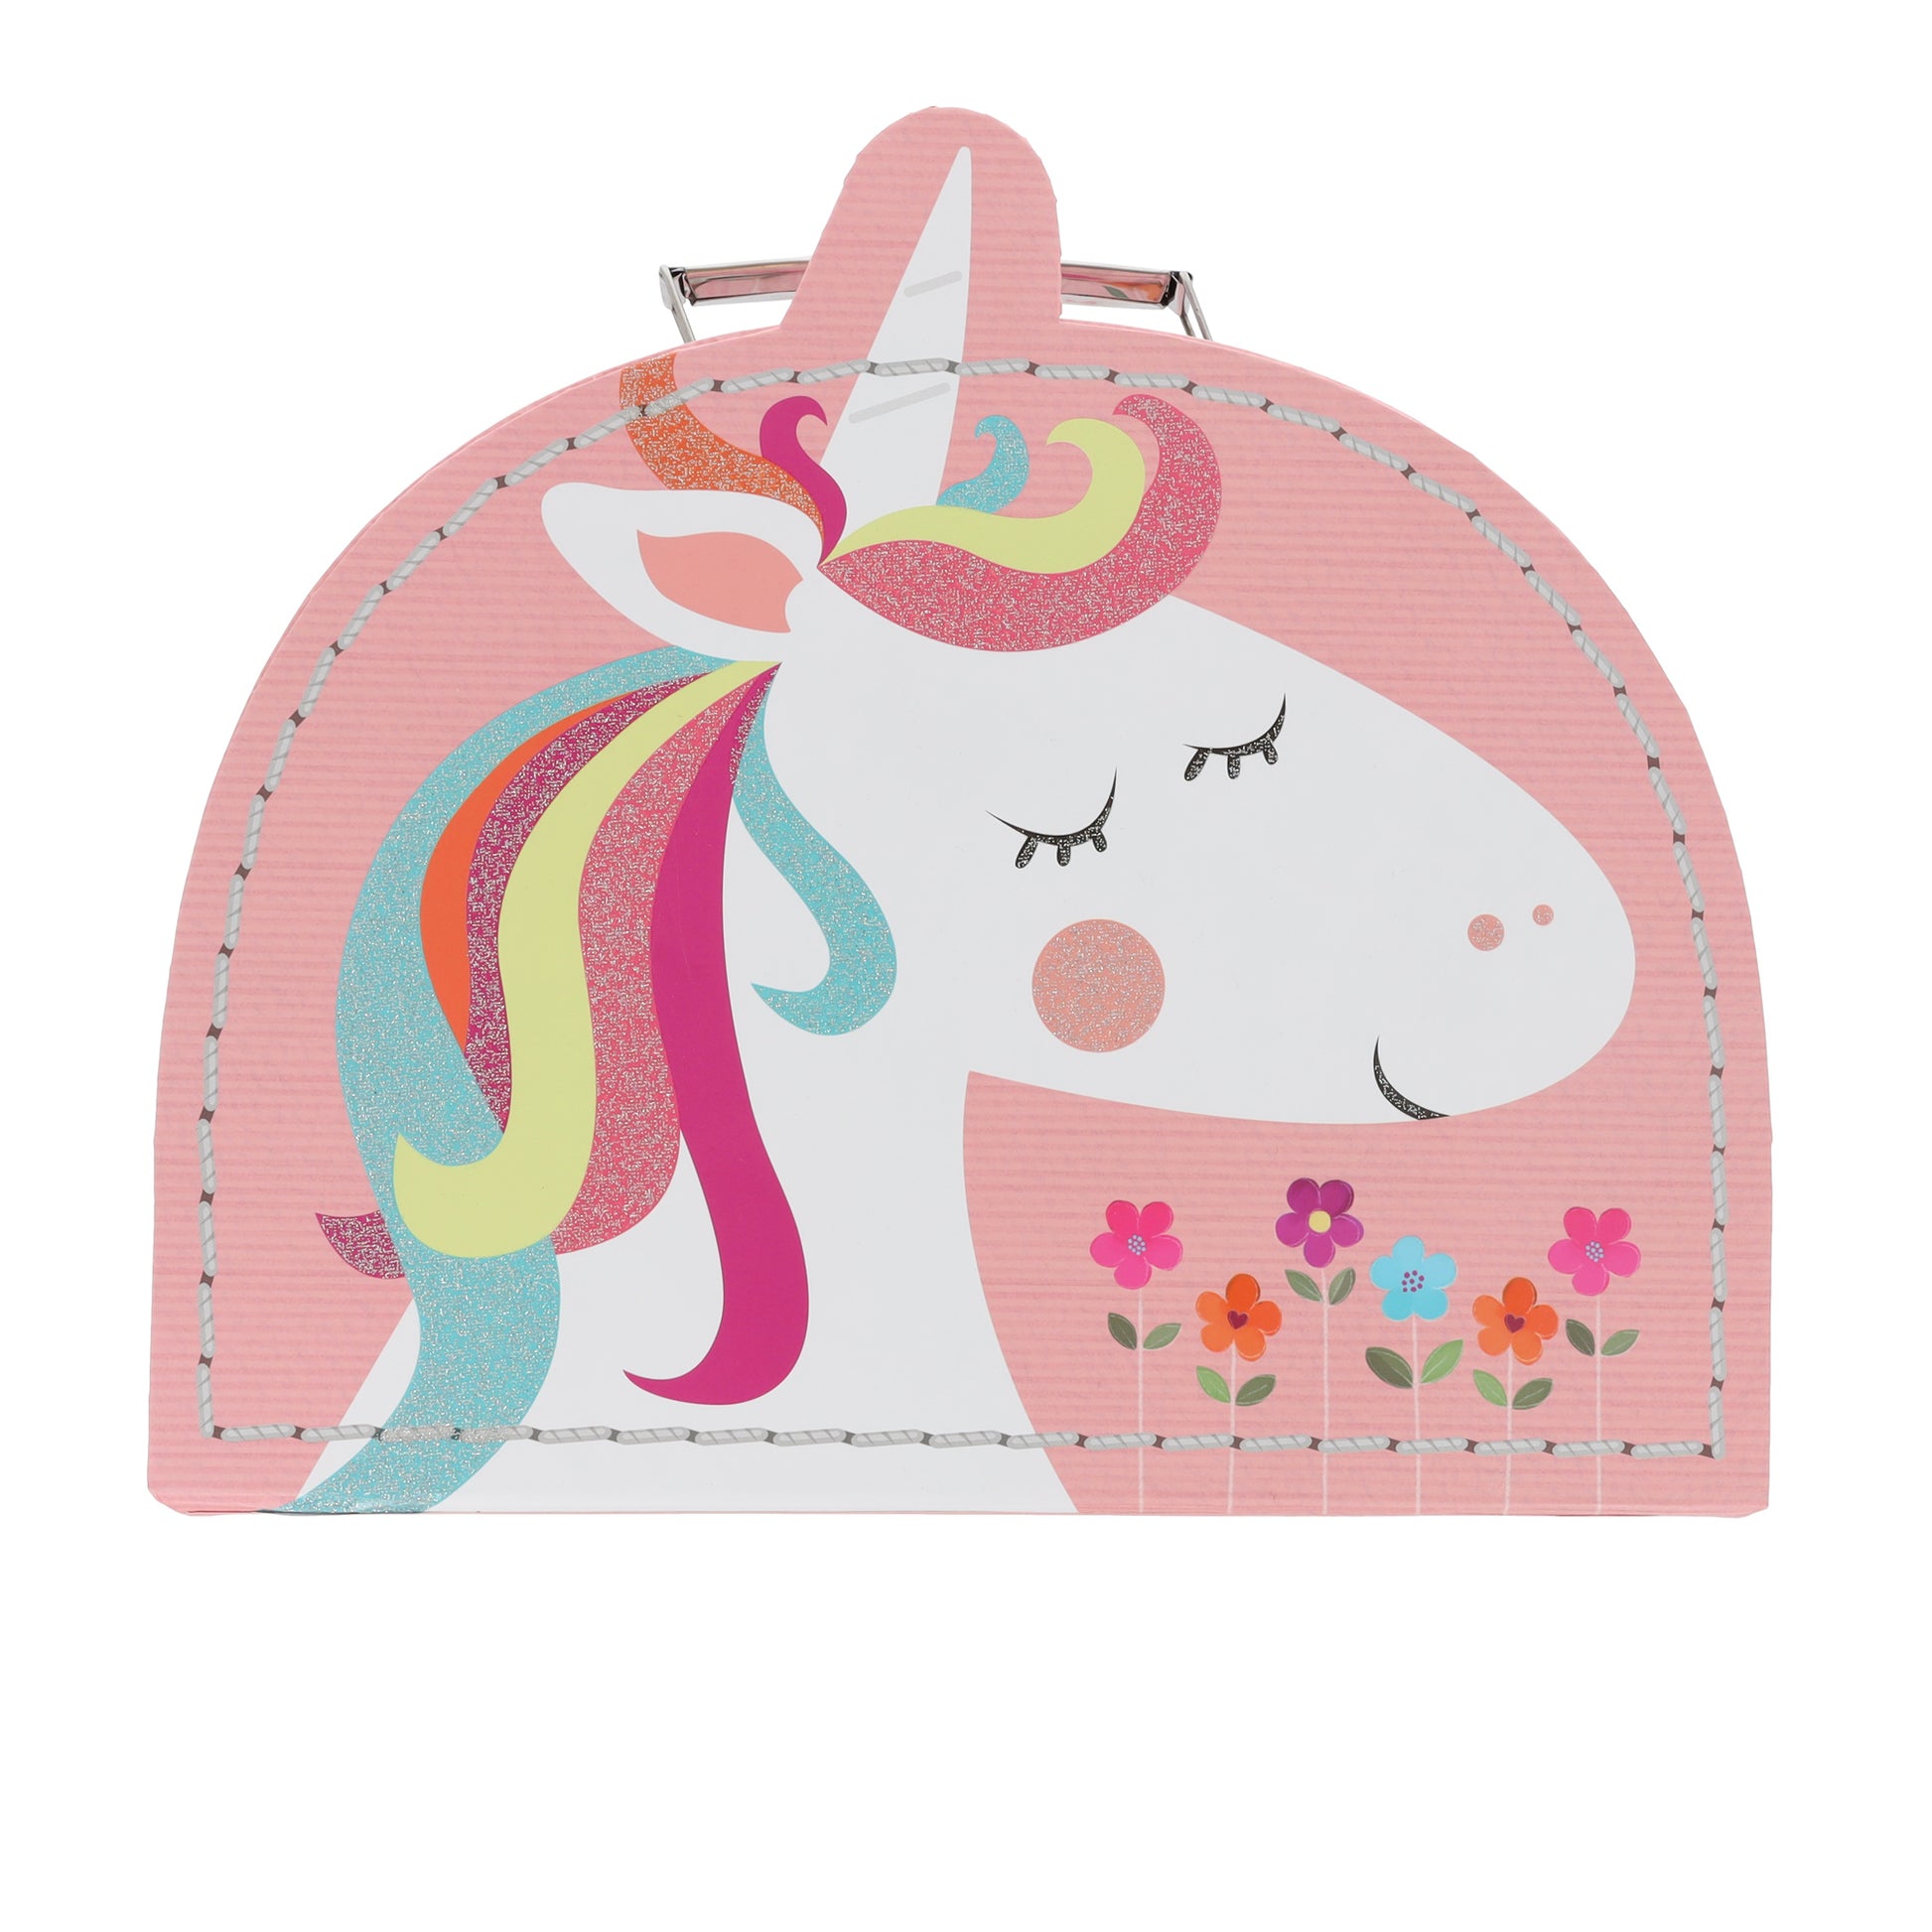 Personalised Storage Suitcase Filled Kids Gift Set  - Always Looking Good - Small Pink Unicorn  